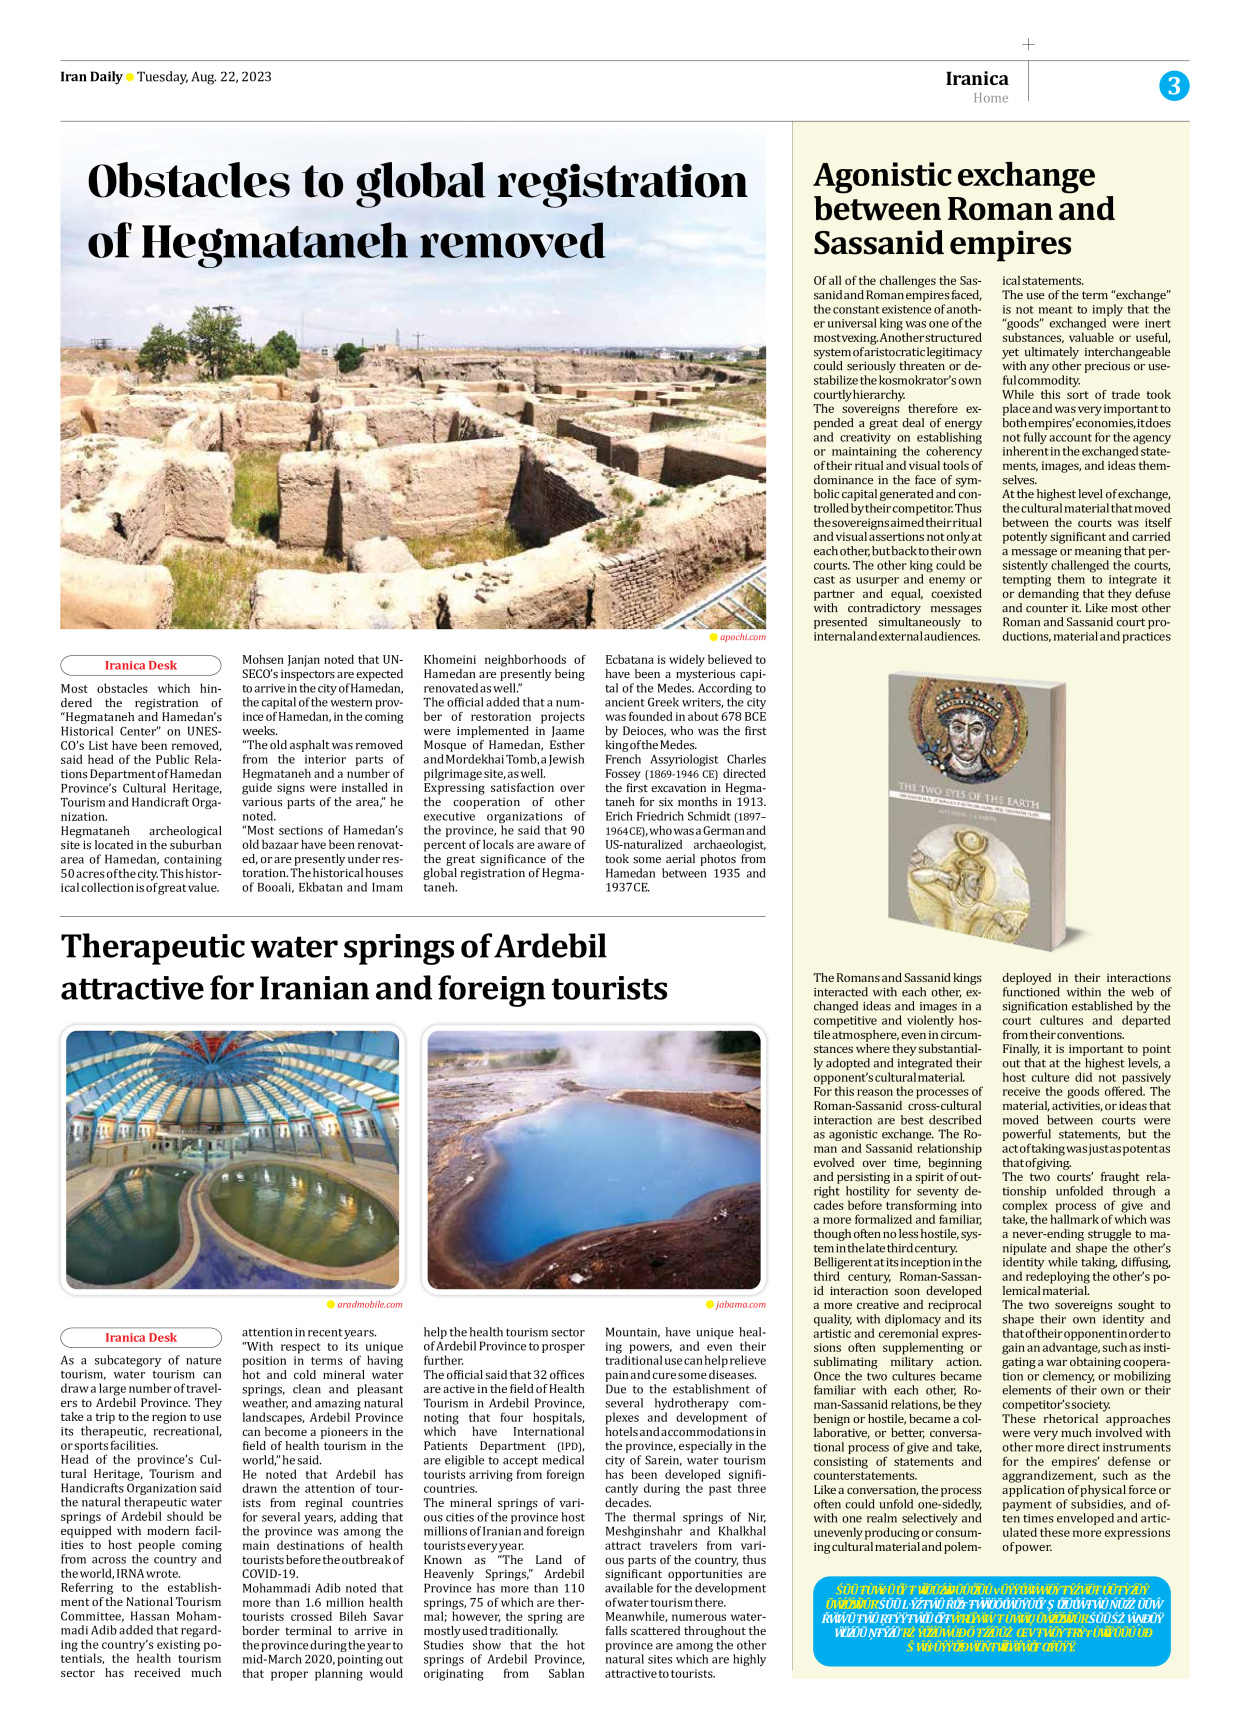 Iran Daily - Number Seven Thousand Three Hundred and Sixty Nine - 22 August 2023 - Page 3